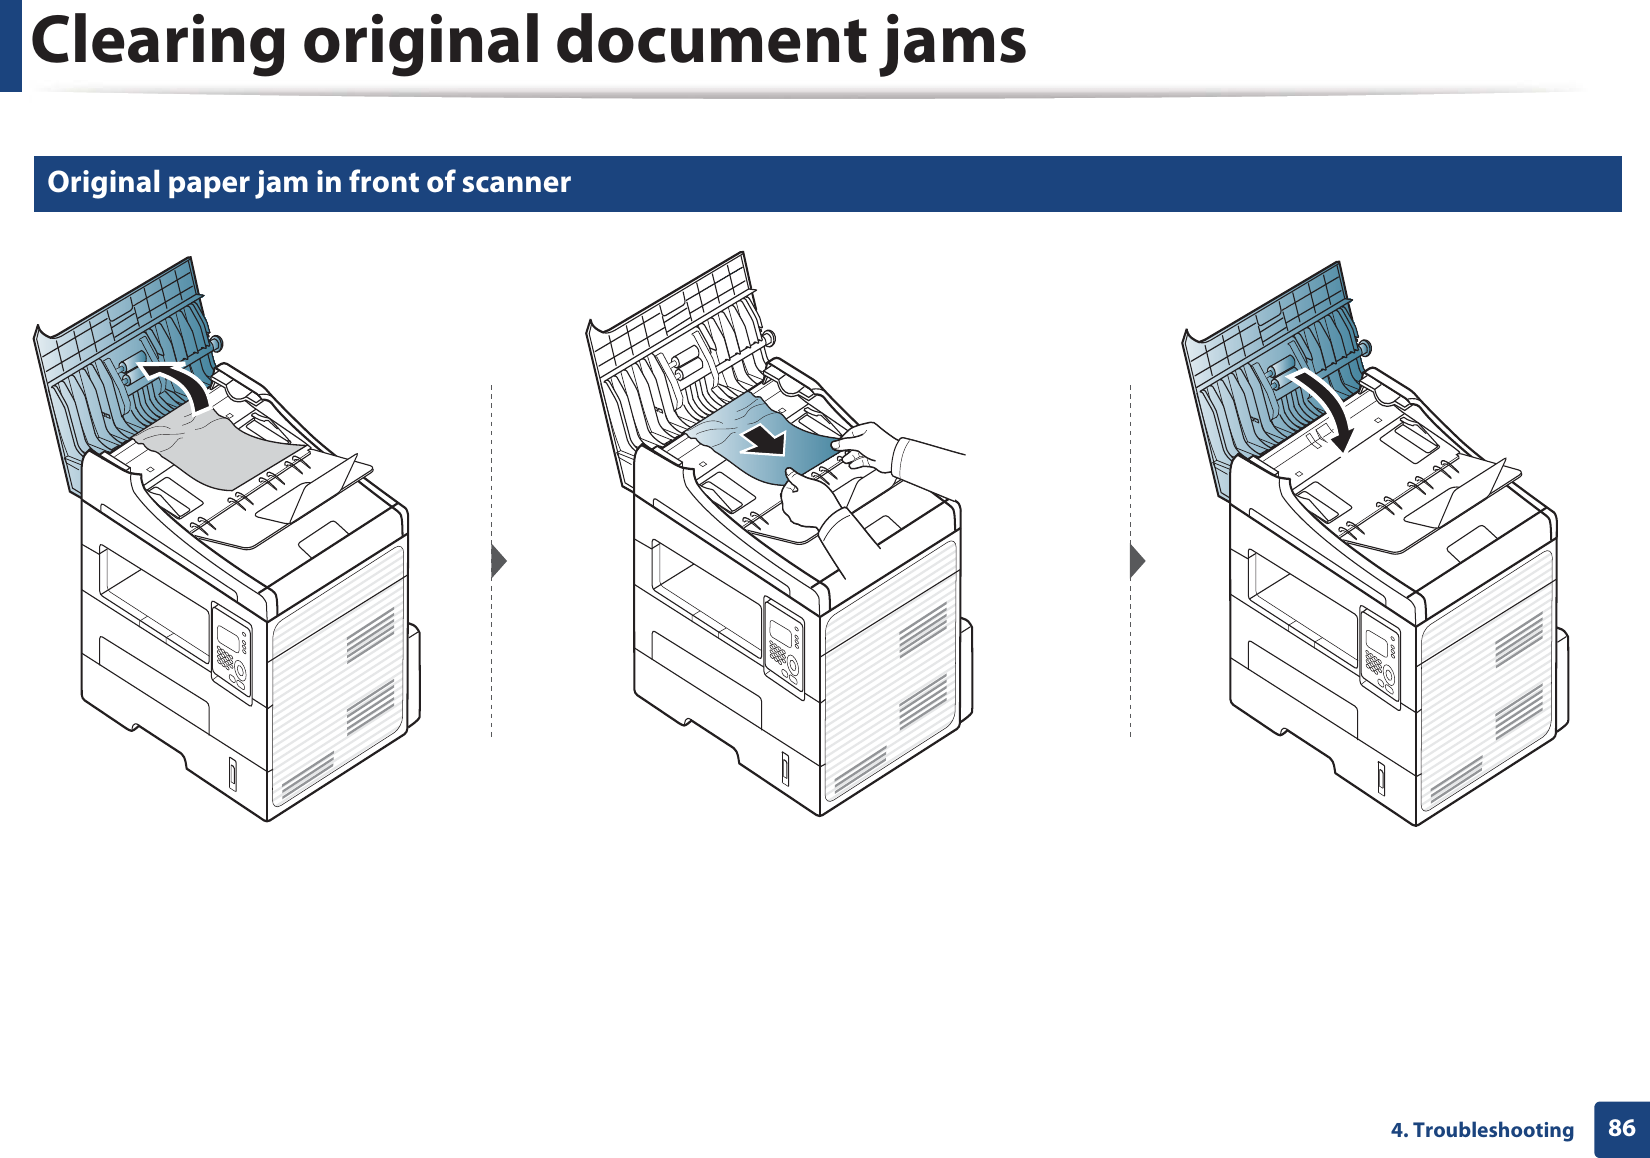 Clearing original document jams864. Troubleshooting1 Original paper jam in front of scanner